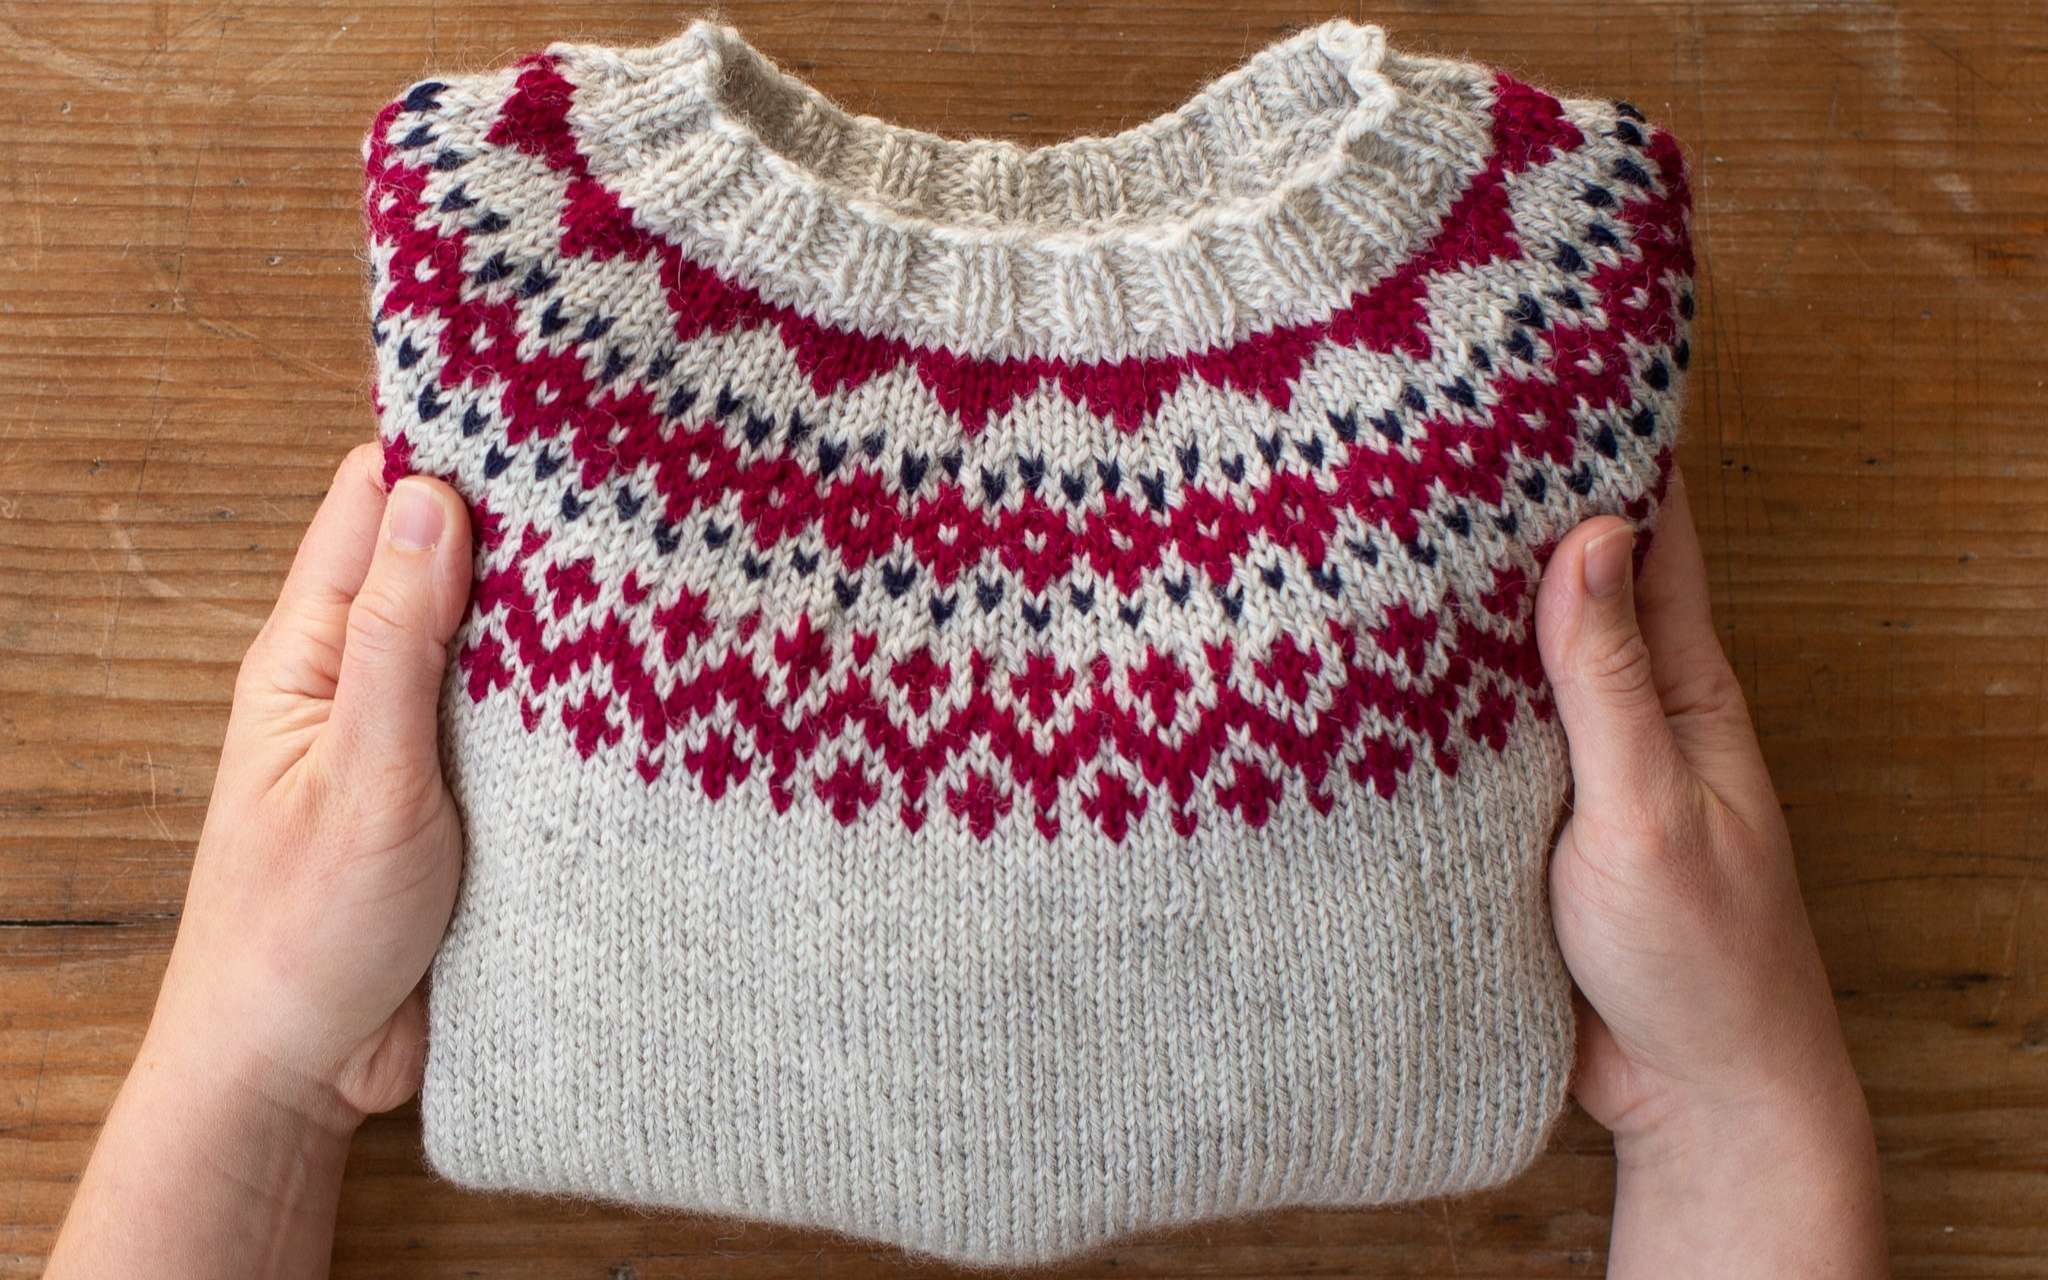 Two hands hold a folded sweater over a wooden surface. The sweater is pale grey with a pink and navy colourwork pattern around the yoke.